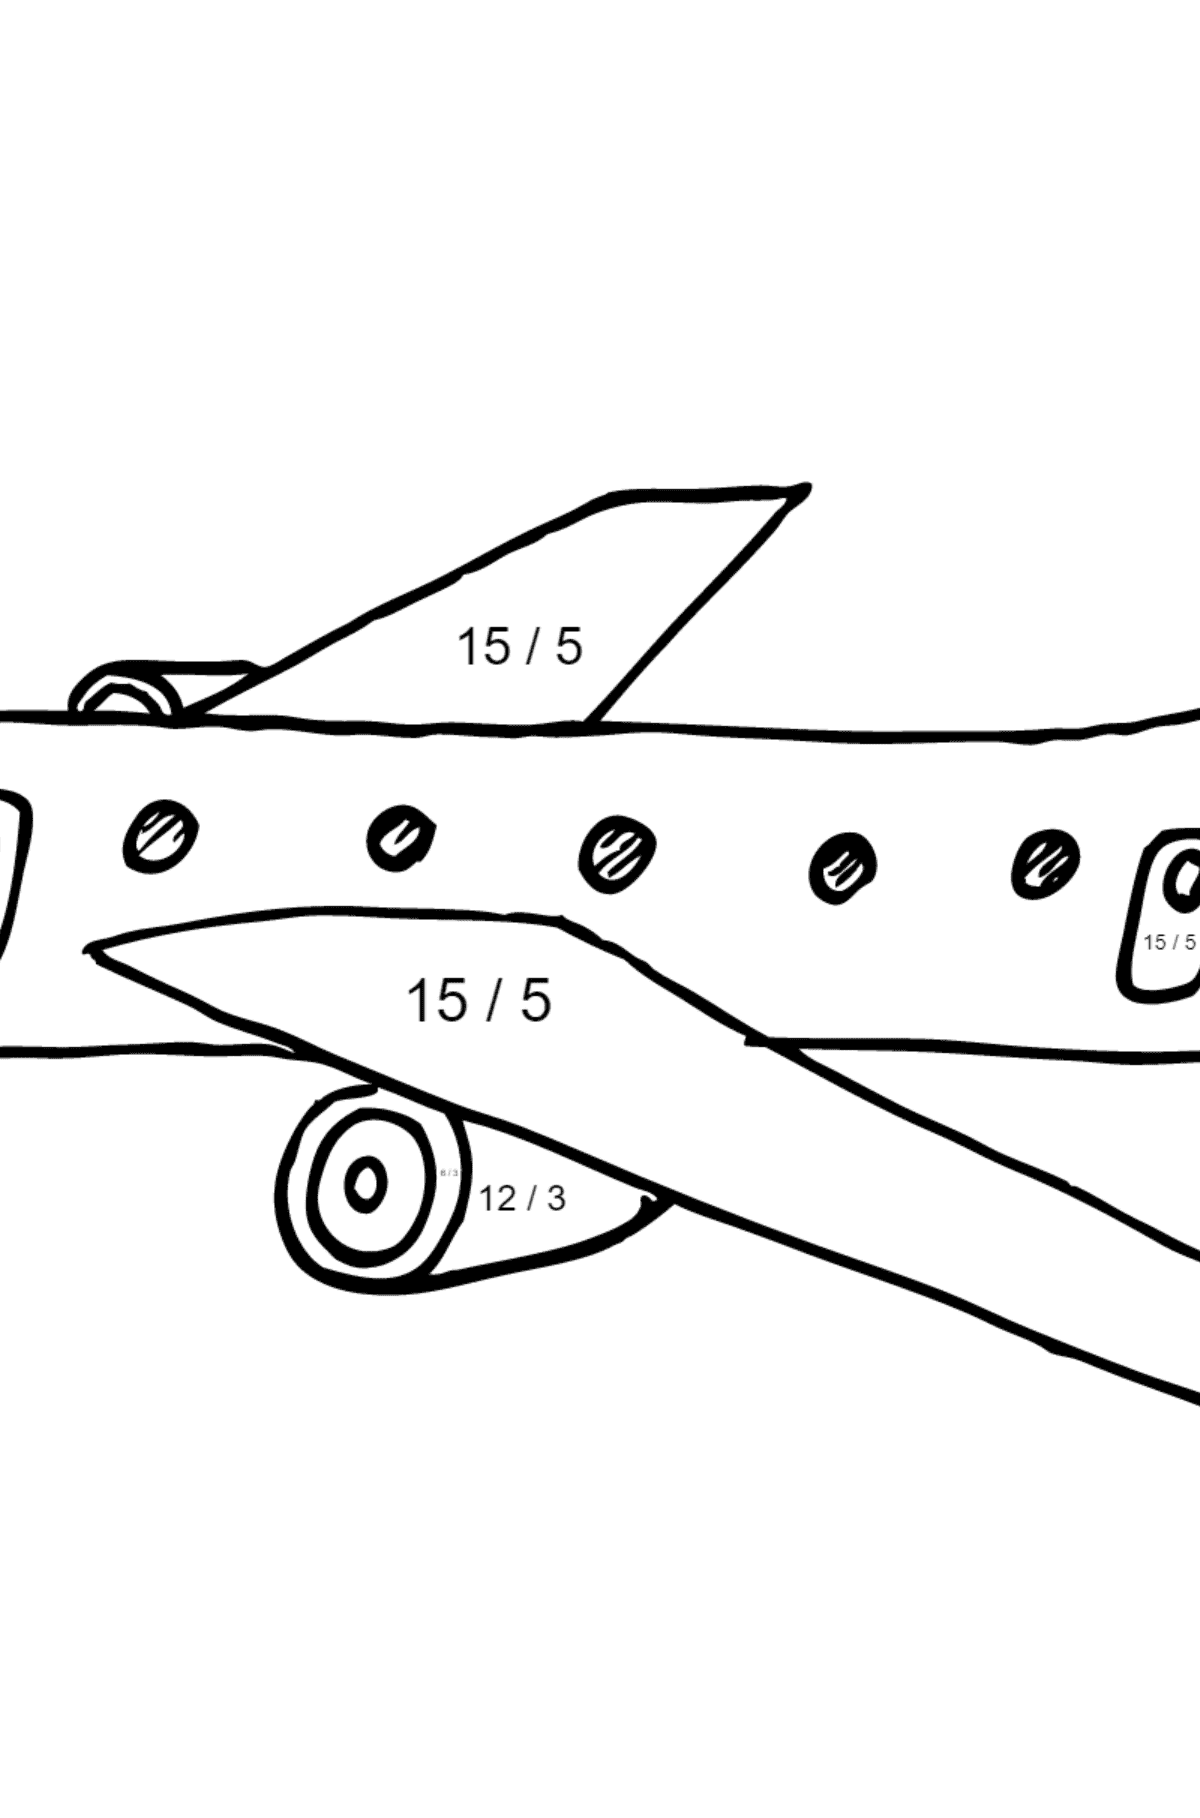 Coloring Page - A Commercial Jet - Math Coloring - Division for Kids